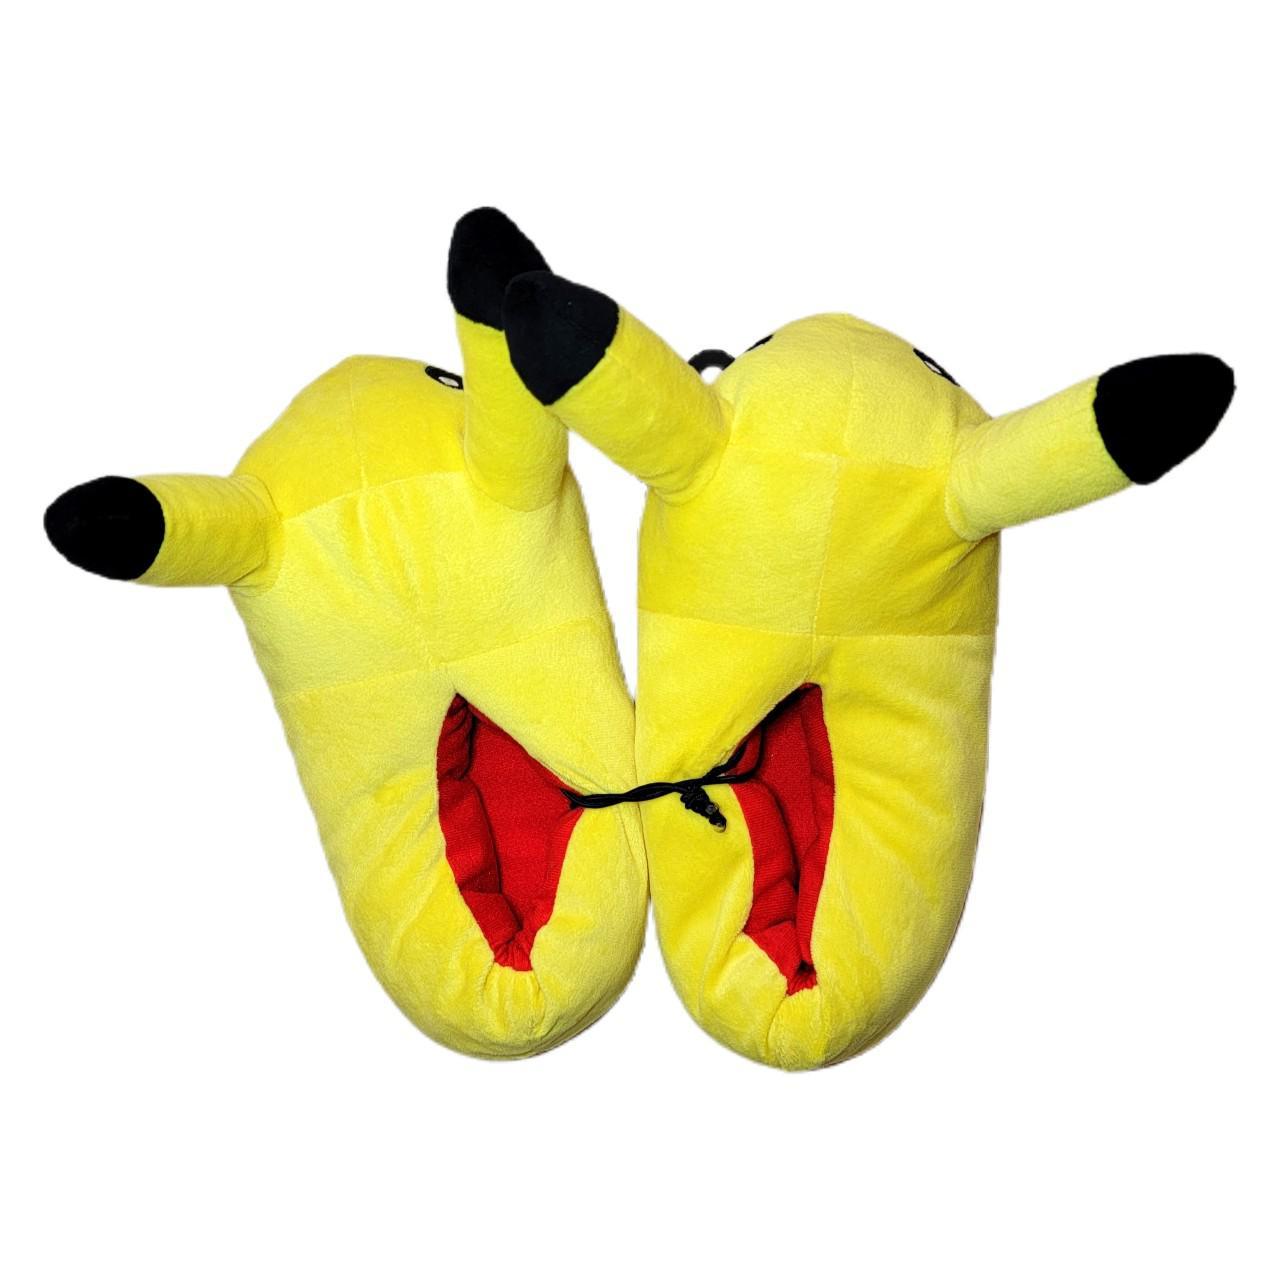 Product Image 2 - ⚡️ retro pikachu slippers ⚡️

official